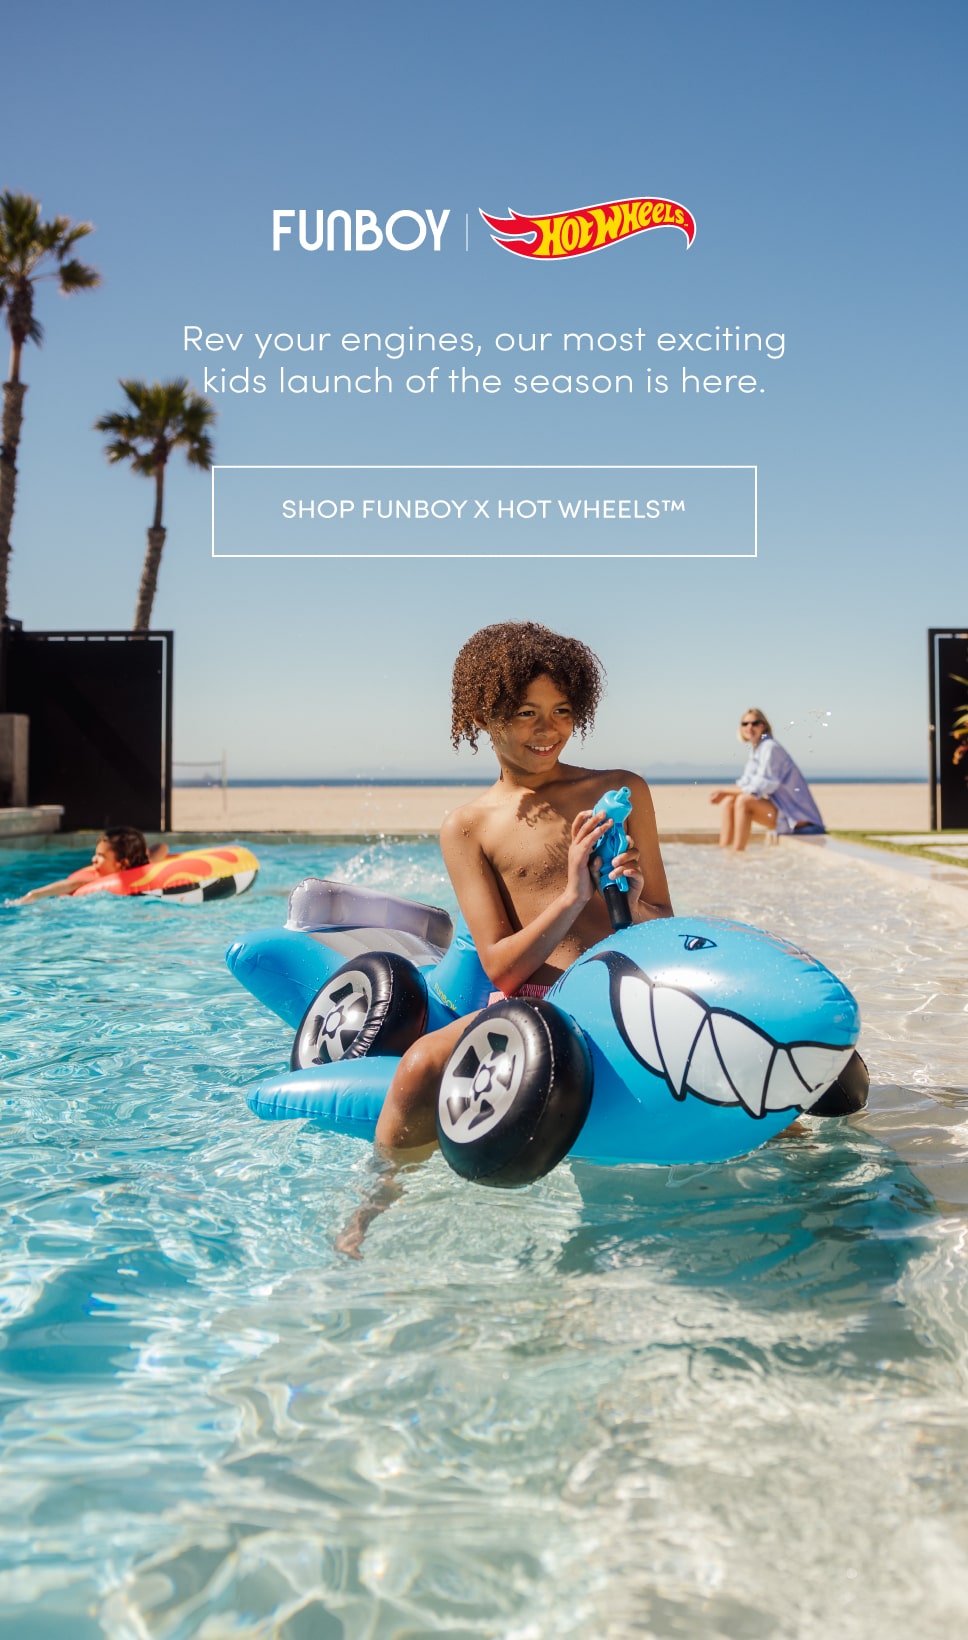 FUNBOY x Hot Wheels. Rev your engines, our most exciting kids launch of the season is here. Shop FUNBOY x Hot Wheels